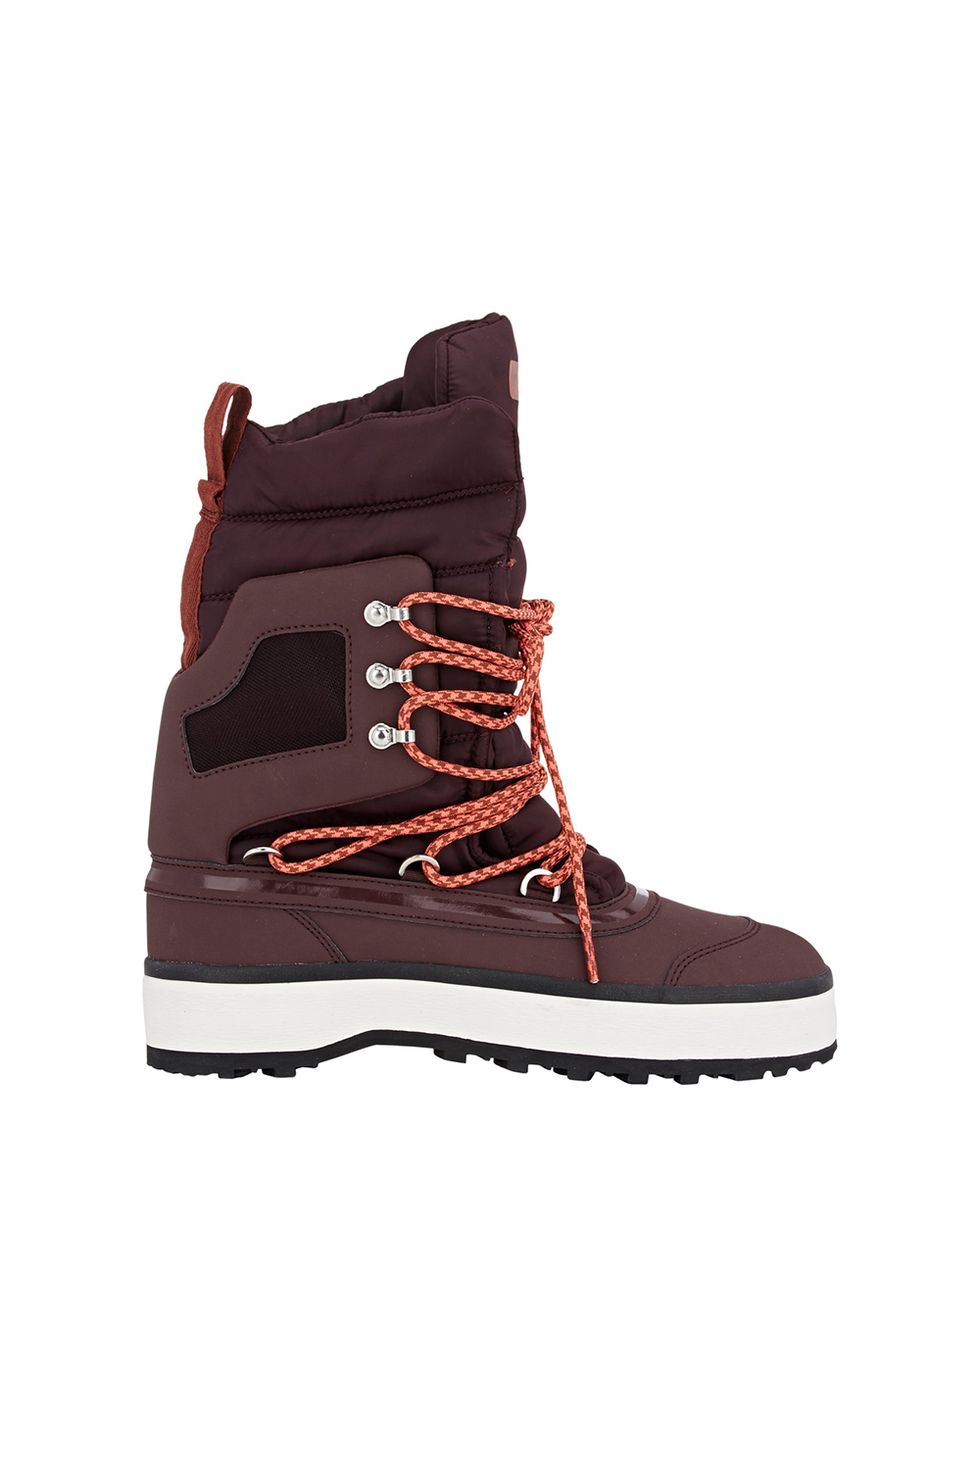 Brown, Carmine, Tan, Maroon, Boot, Walking shoe, Outdoor shoe, Leather, Work boots, Synthetic rubber, 